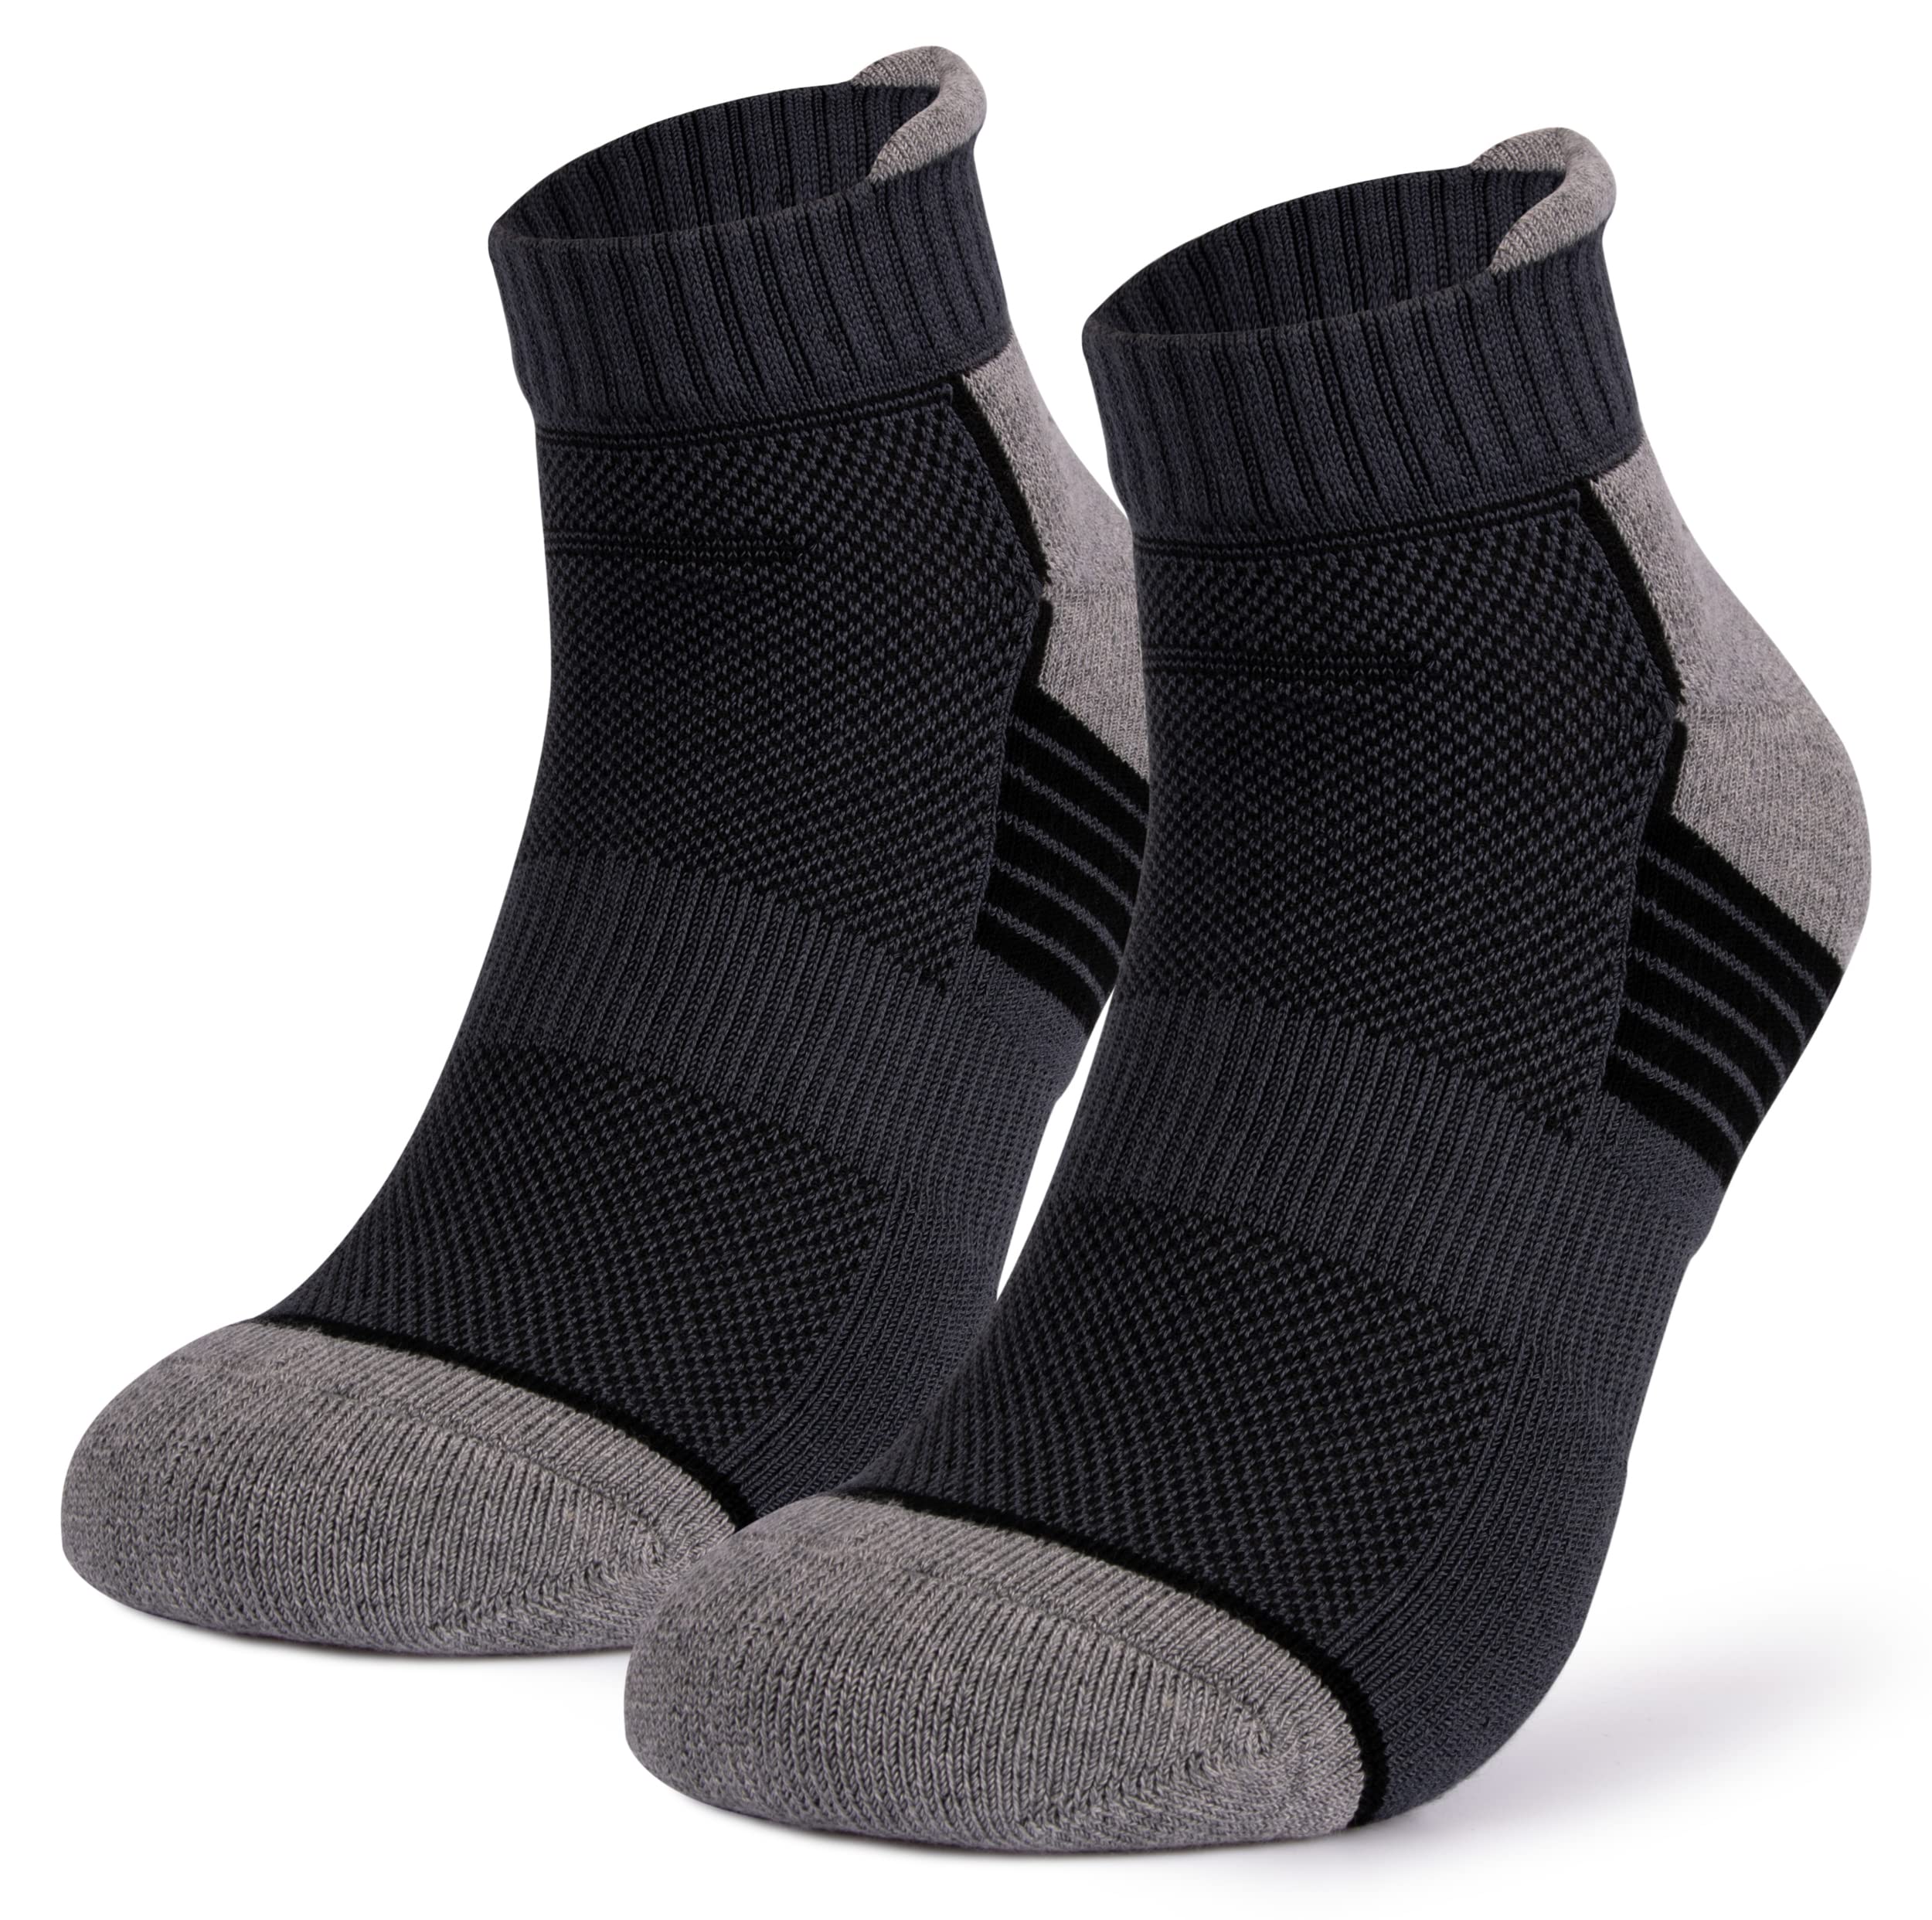 Mush Bamboo Performance Socks for Men || Sports & Casual Wear Ultra Soft, Anti Odor, Breathable Ankle Length Pack of 3 UK Size 6-10 (Black, Dark Grey, Navy Blue & Dark Grey, Navy Blue, Light Grey, 6)